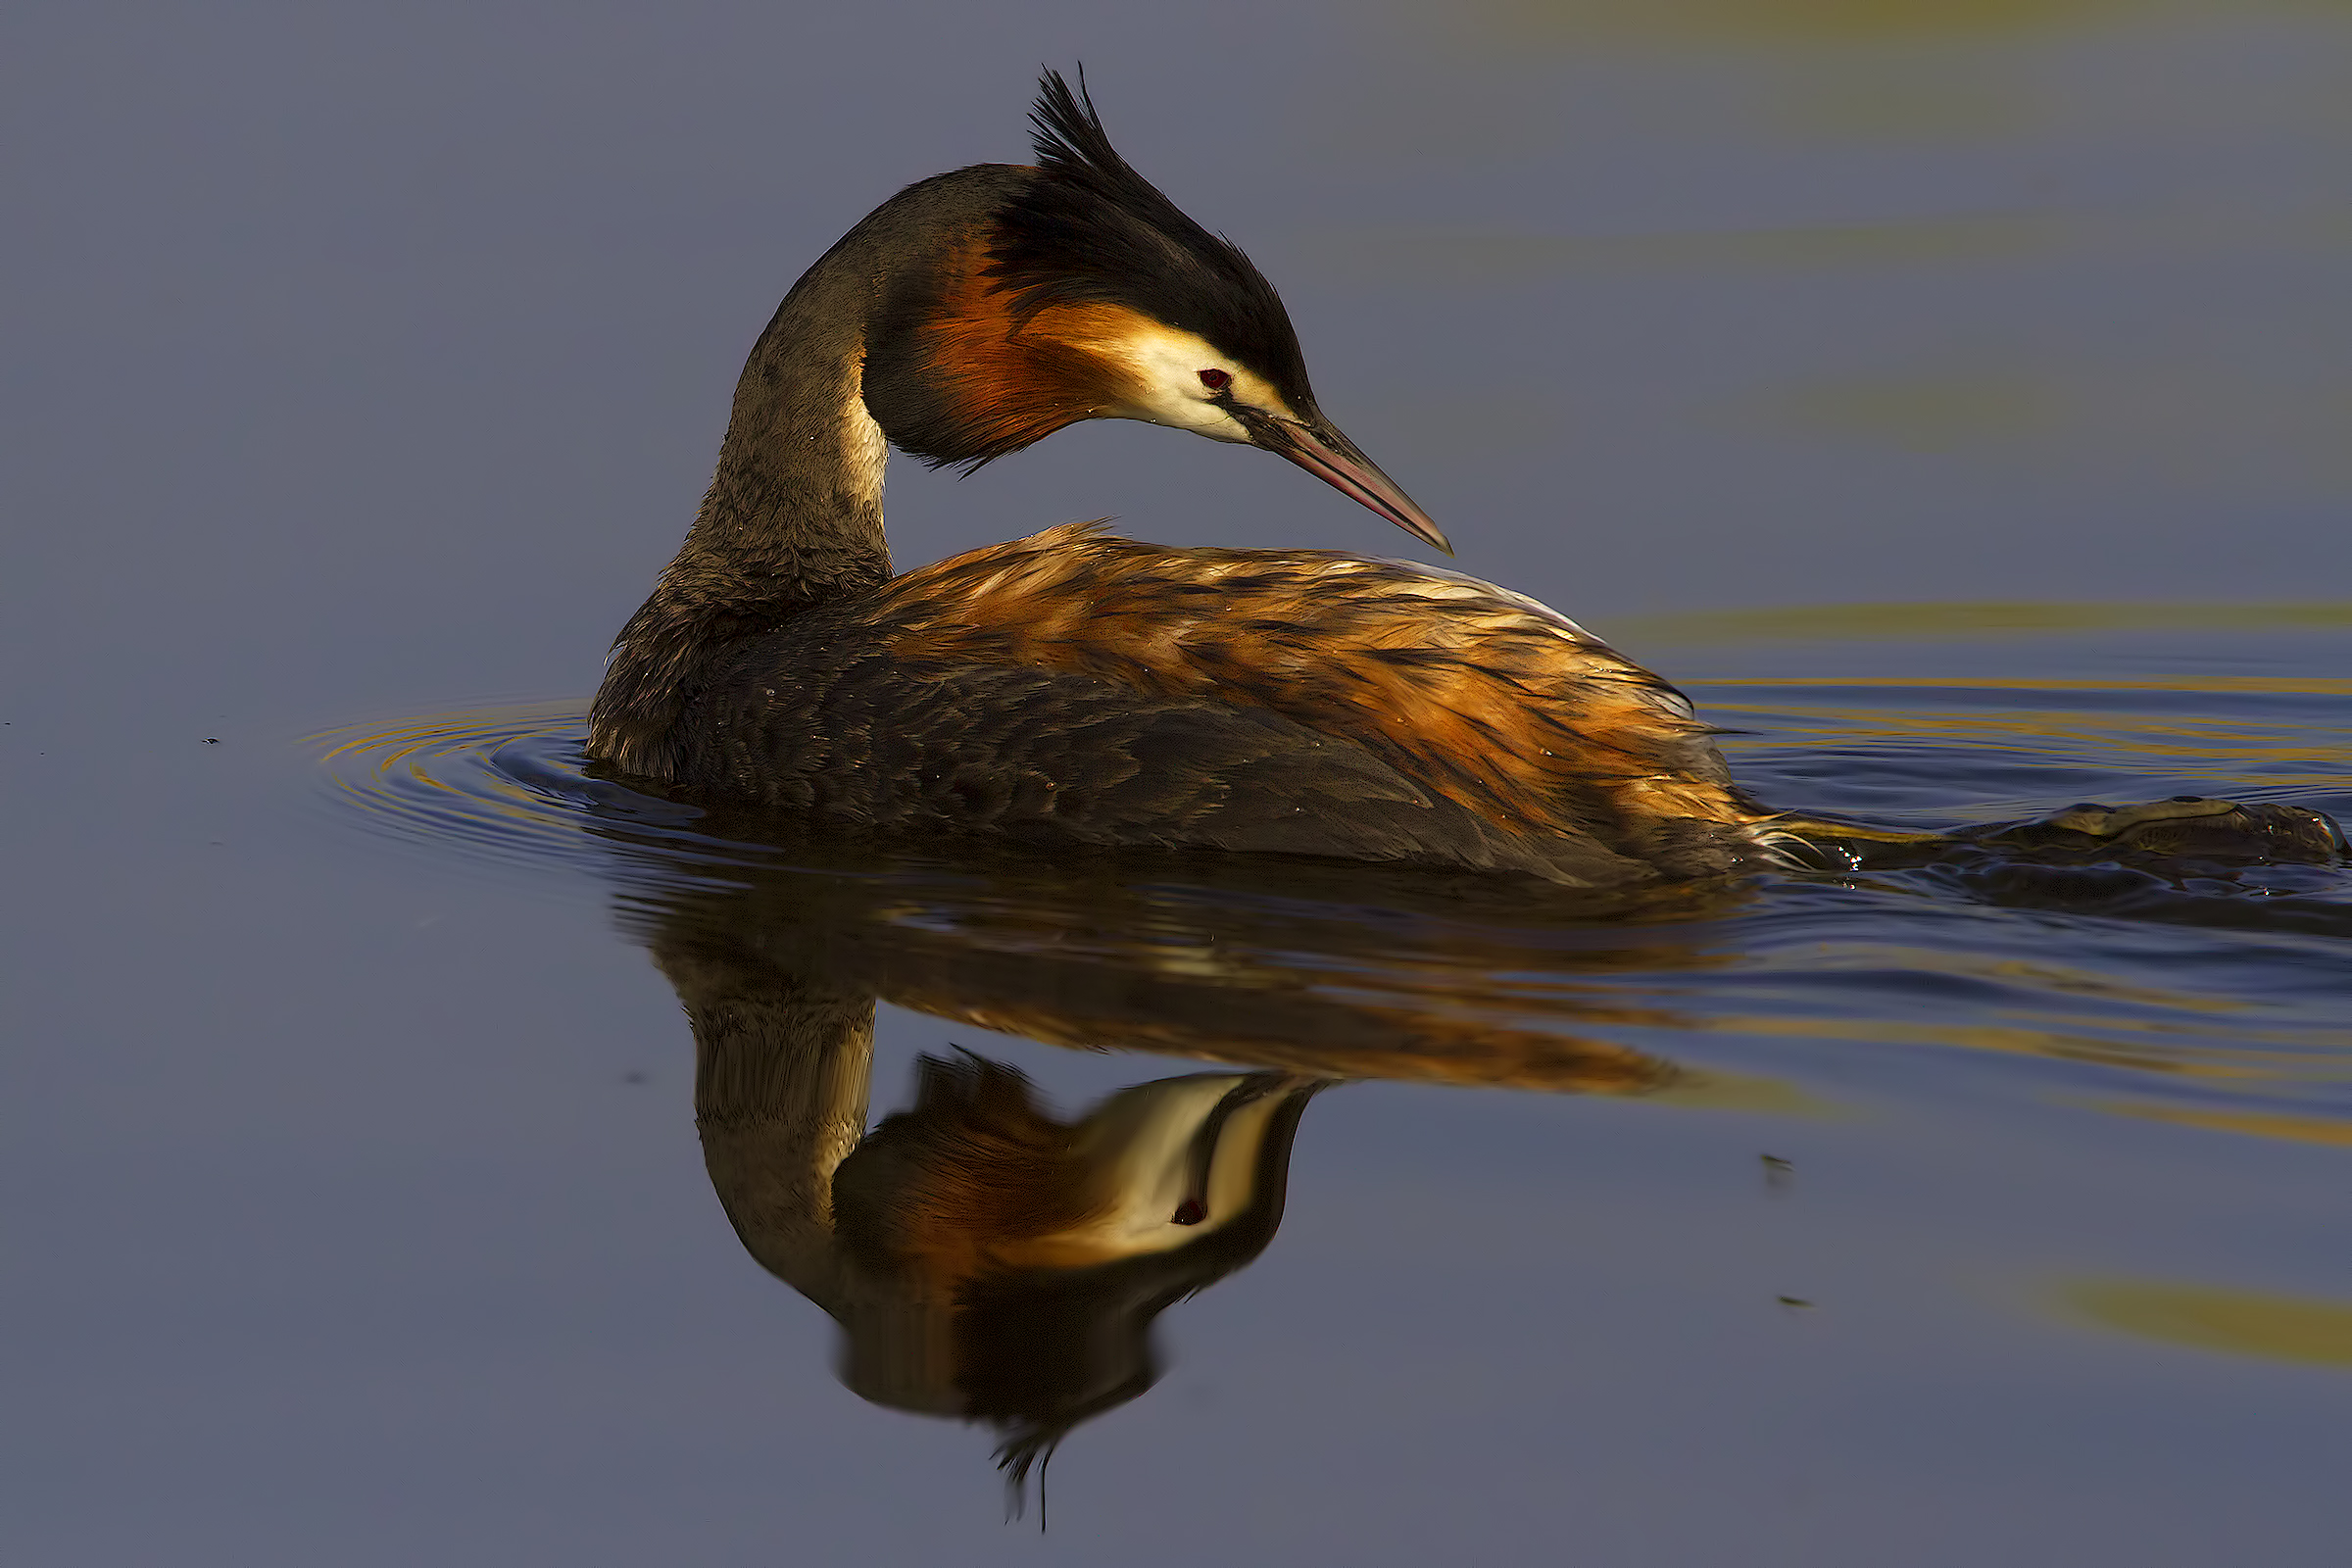 Grebe light and colors...